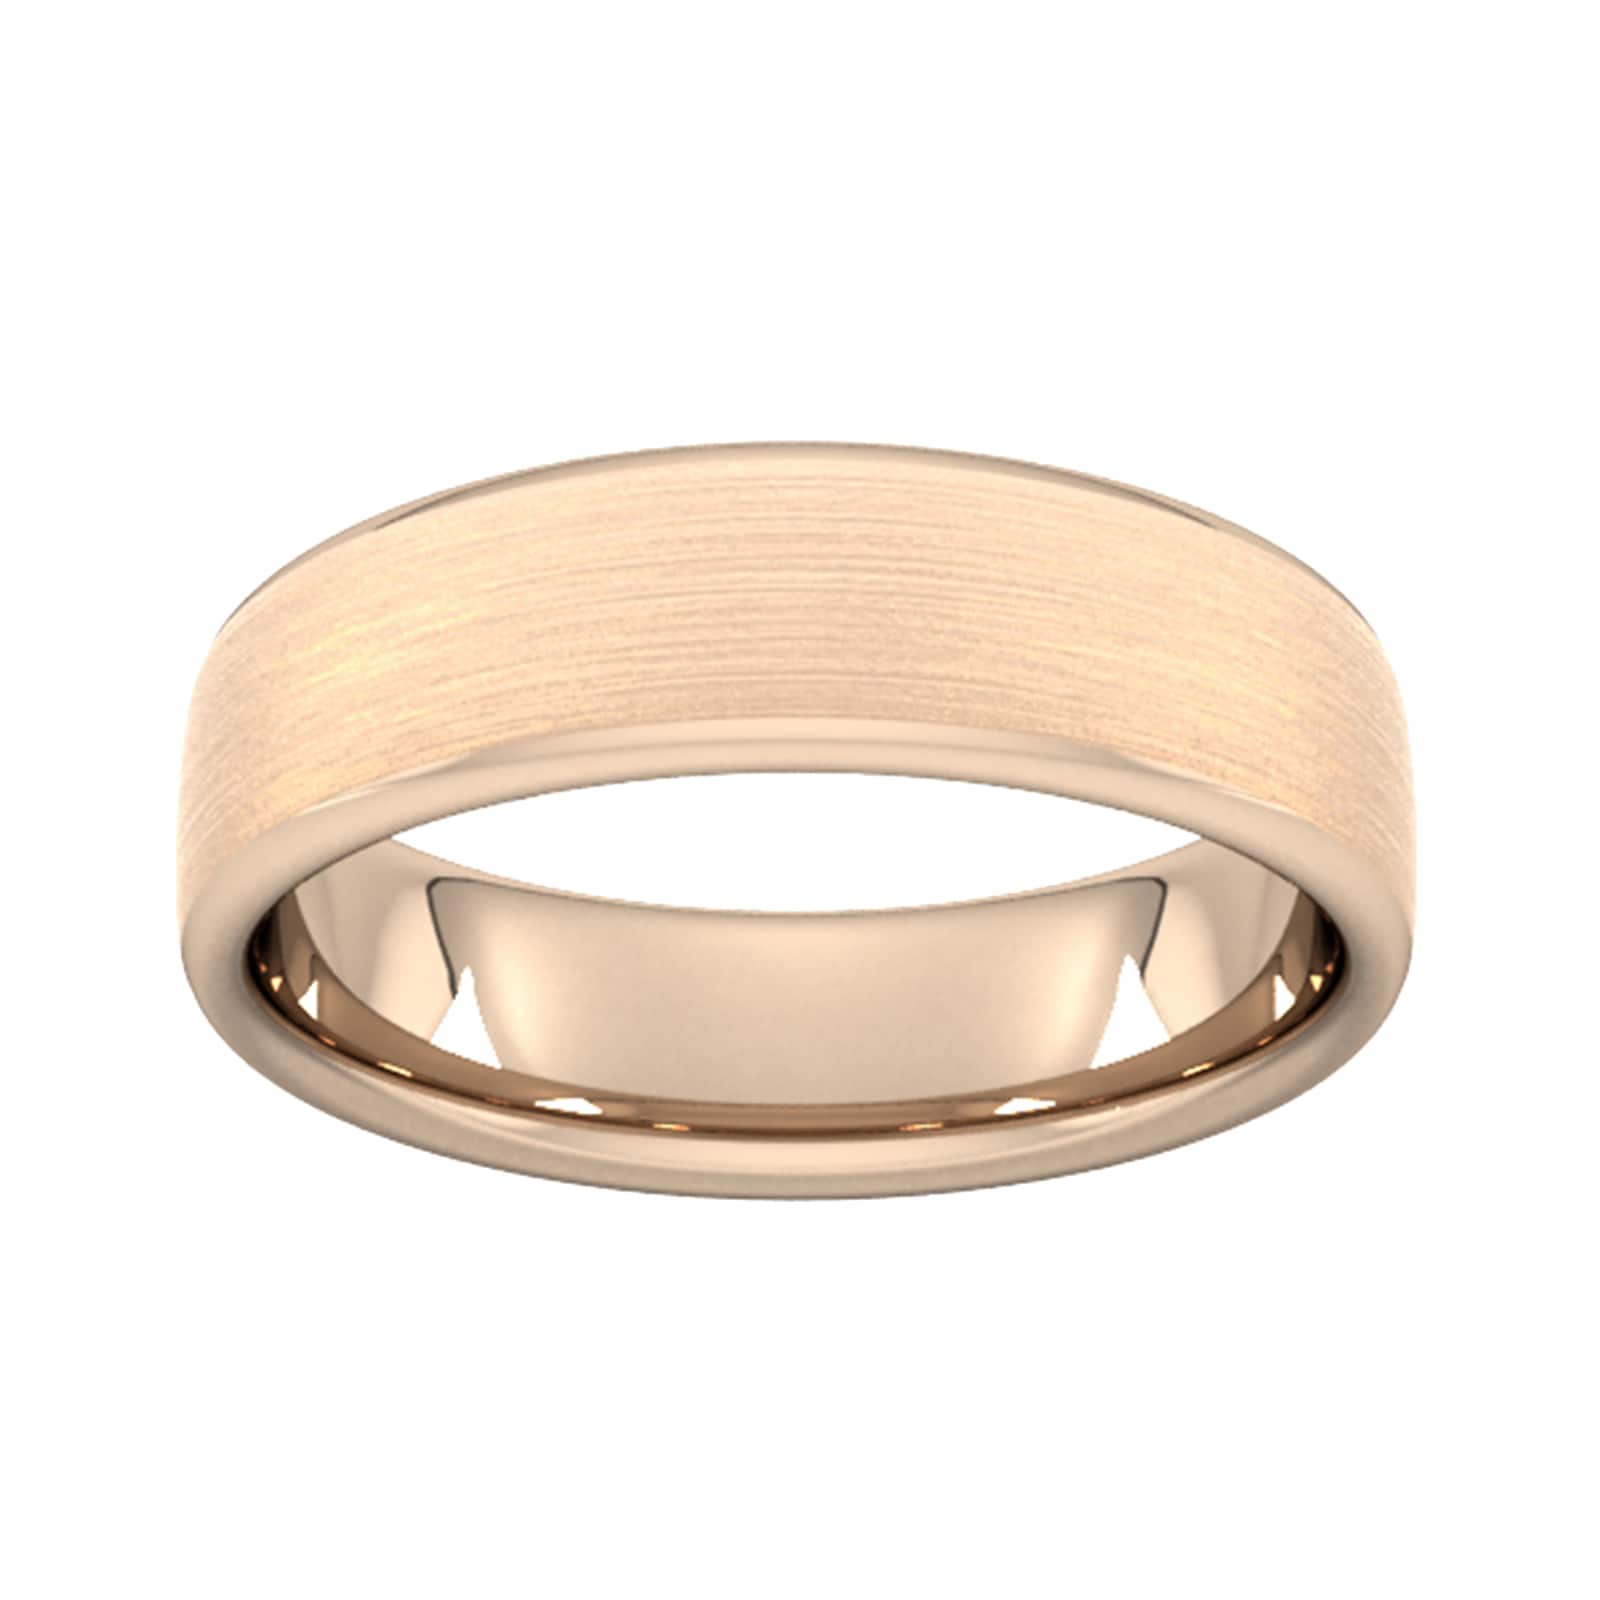 6mm Traditional Court Standard Matt Finished Wedding Ring In 18 Carat Rose Gold - Ring Size L